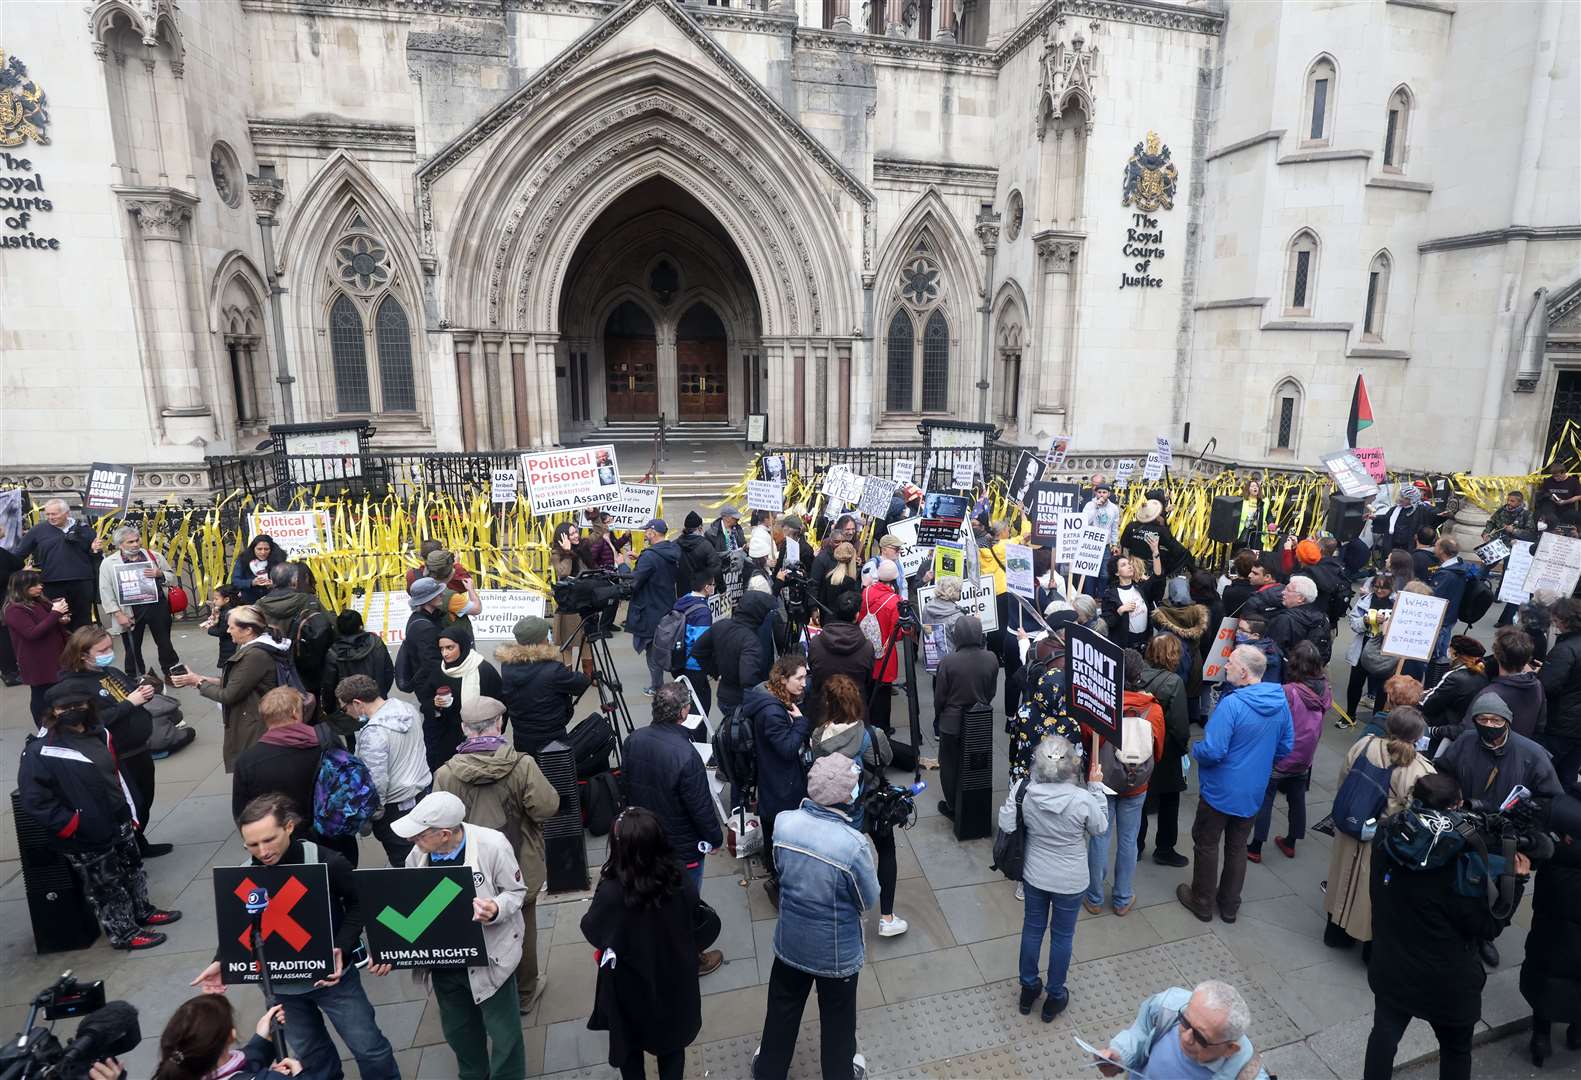 Assange supporters demonstrated outside the High Court in London (James Manning/PA)